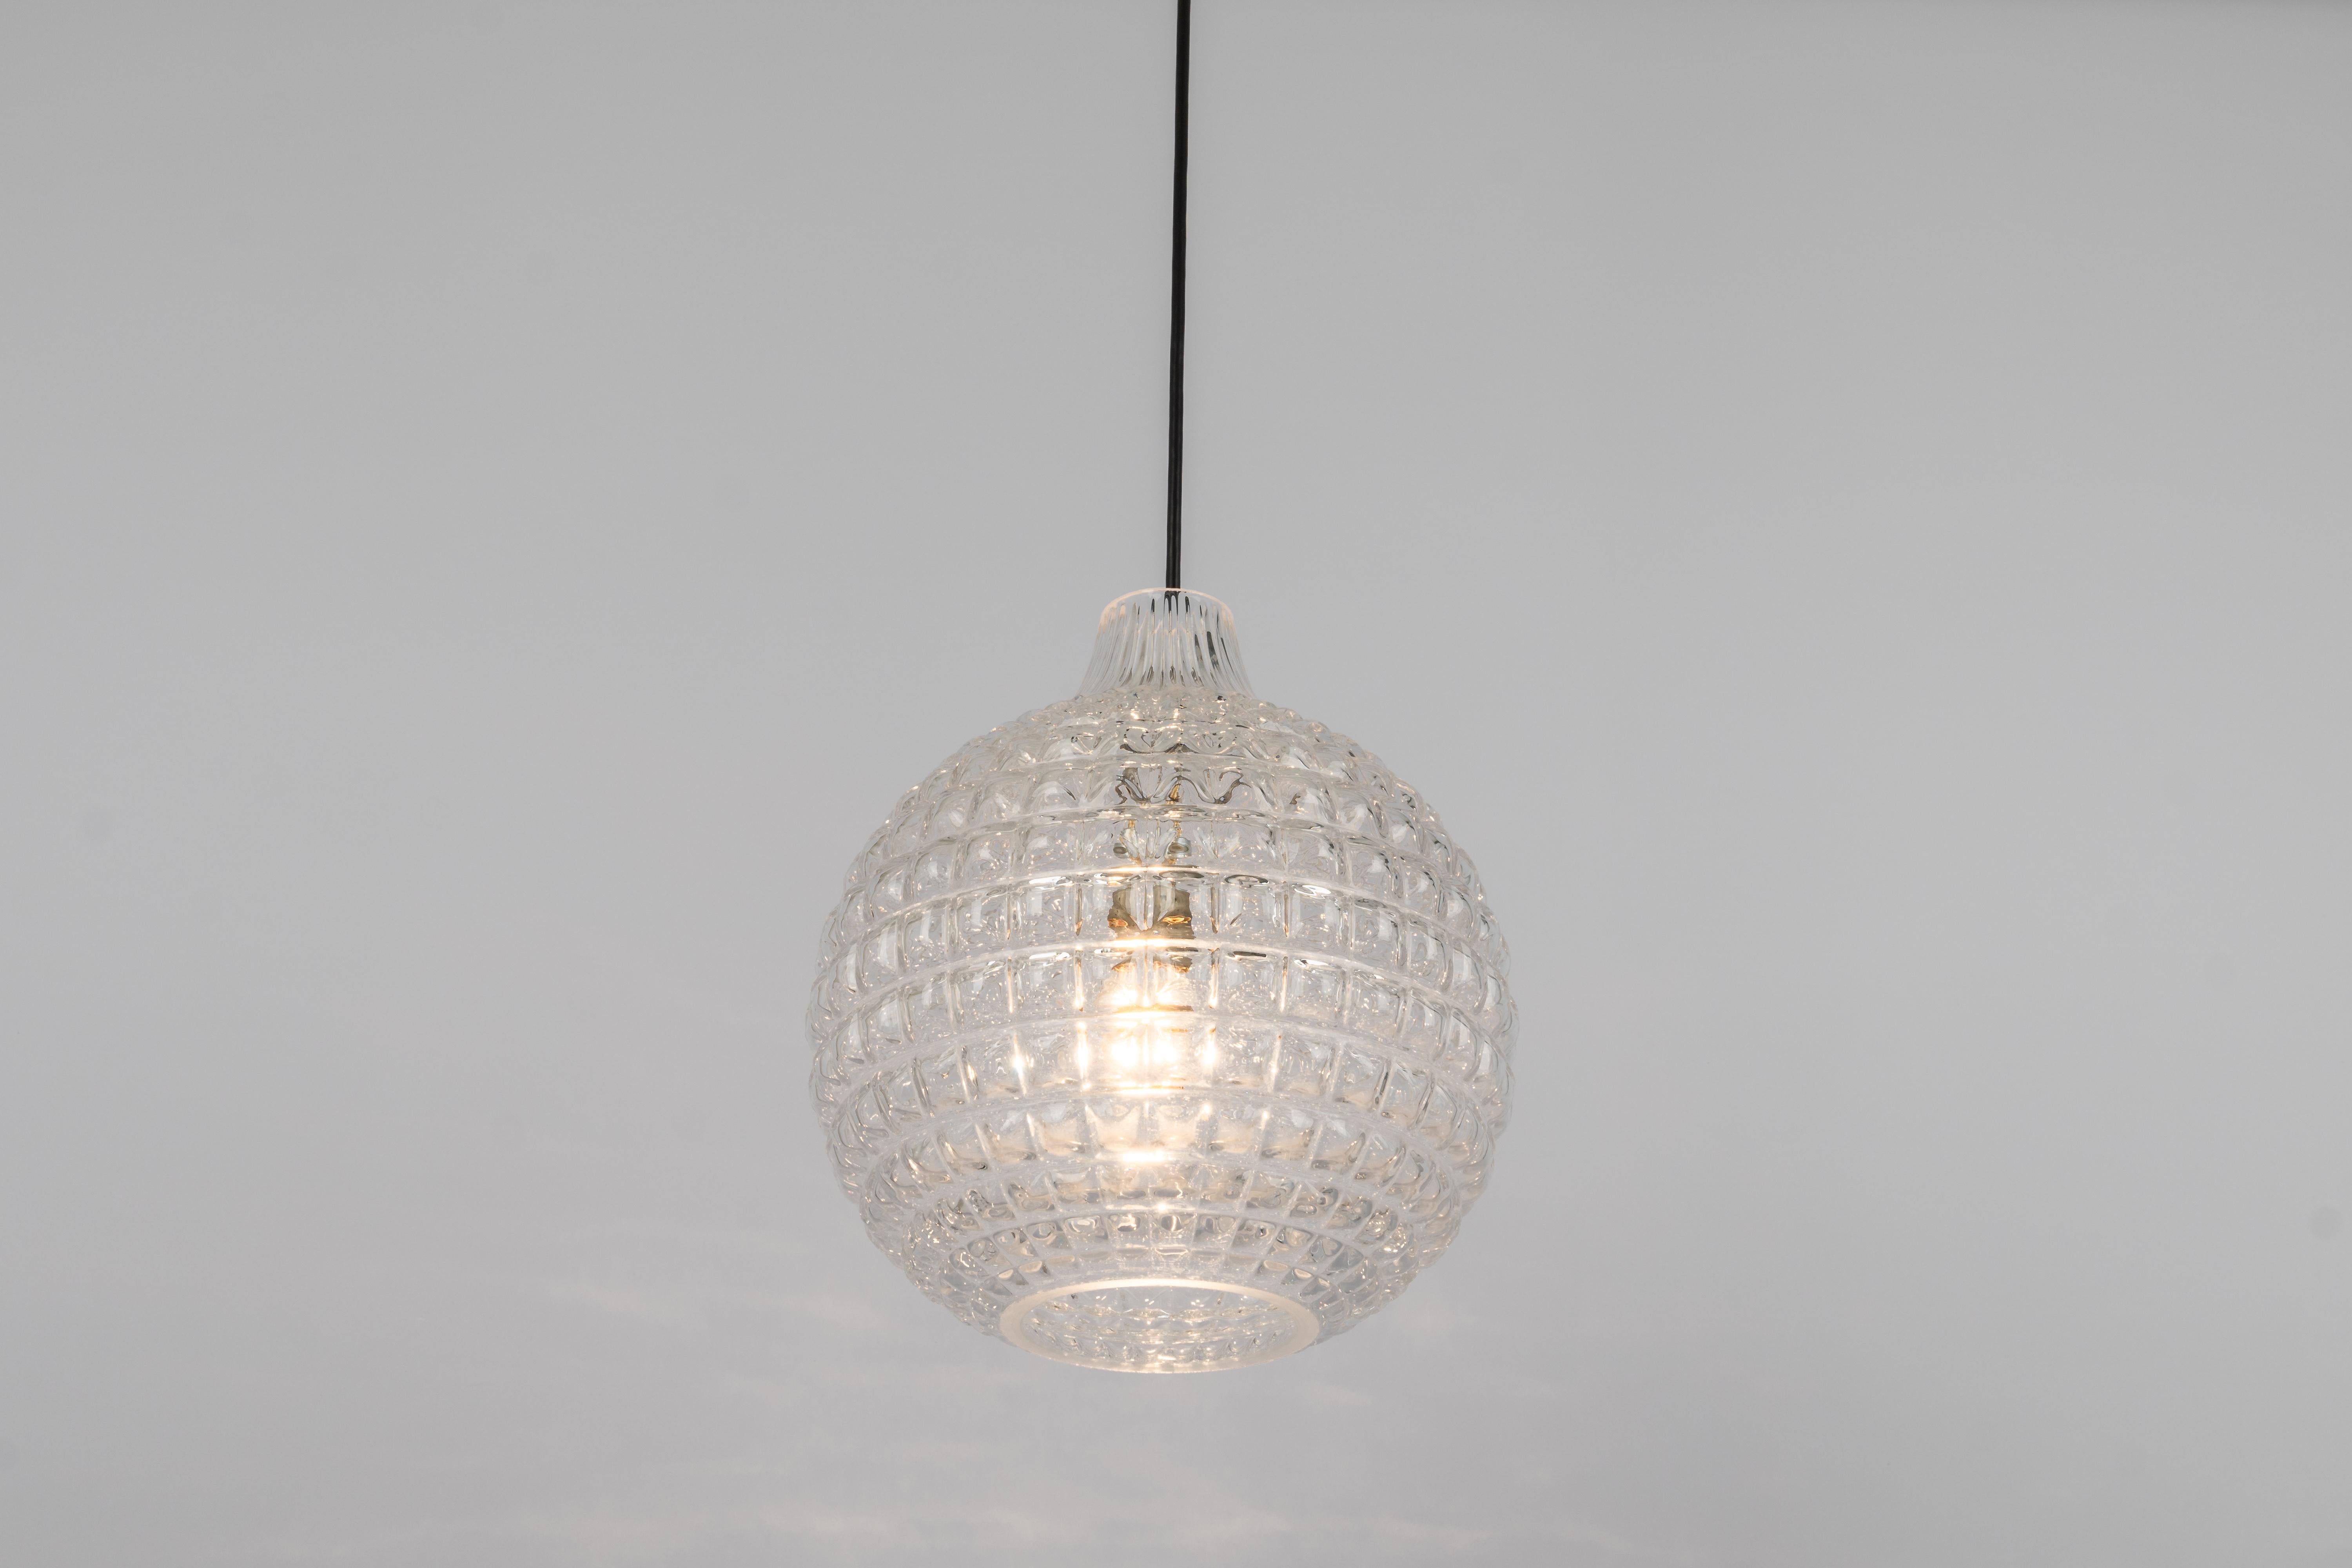 1 of 2 Stunning Crystal Glass Pendant Light, Peill & Putzler, Germany, 1970s For Sale 8